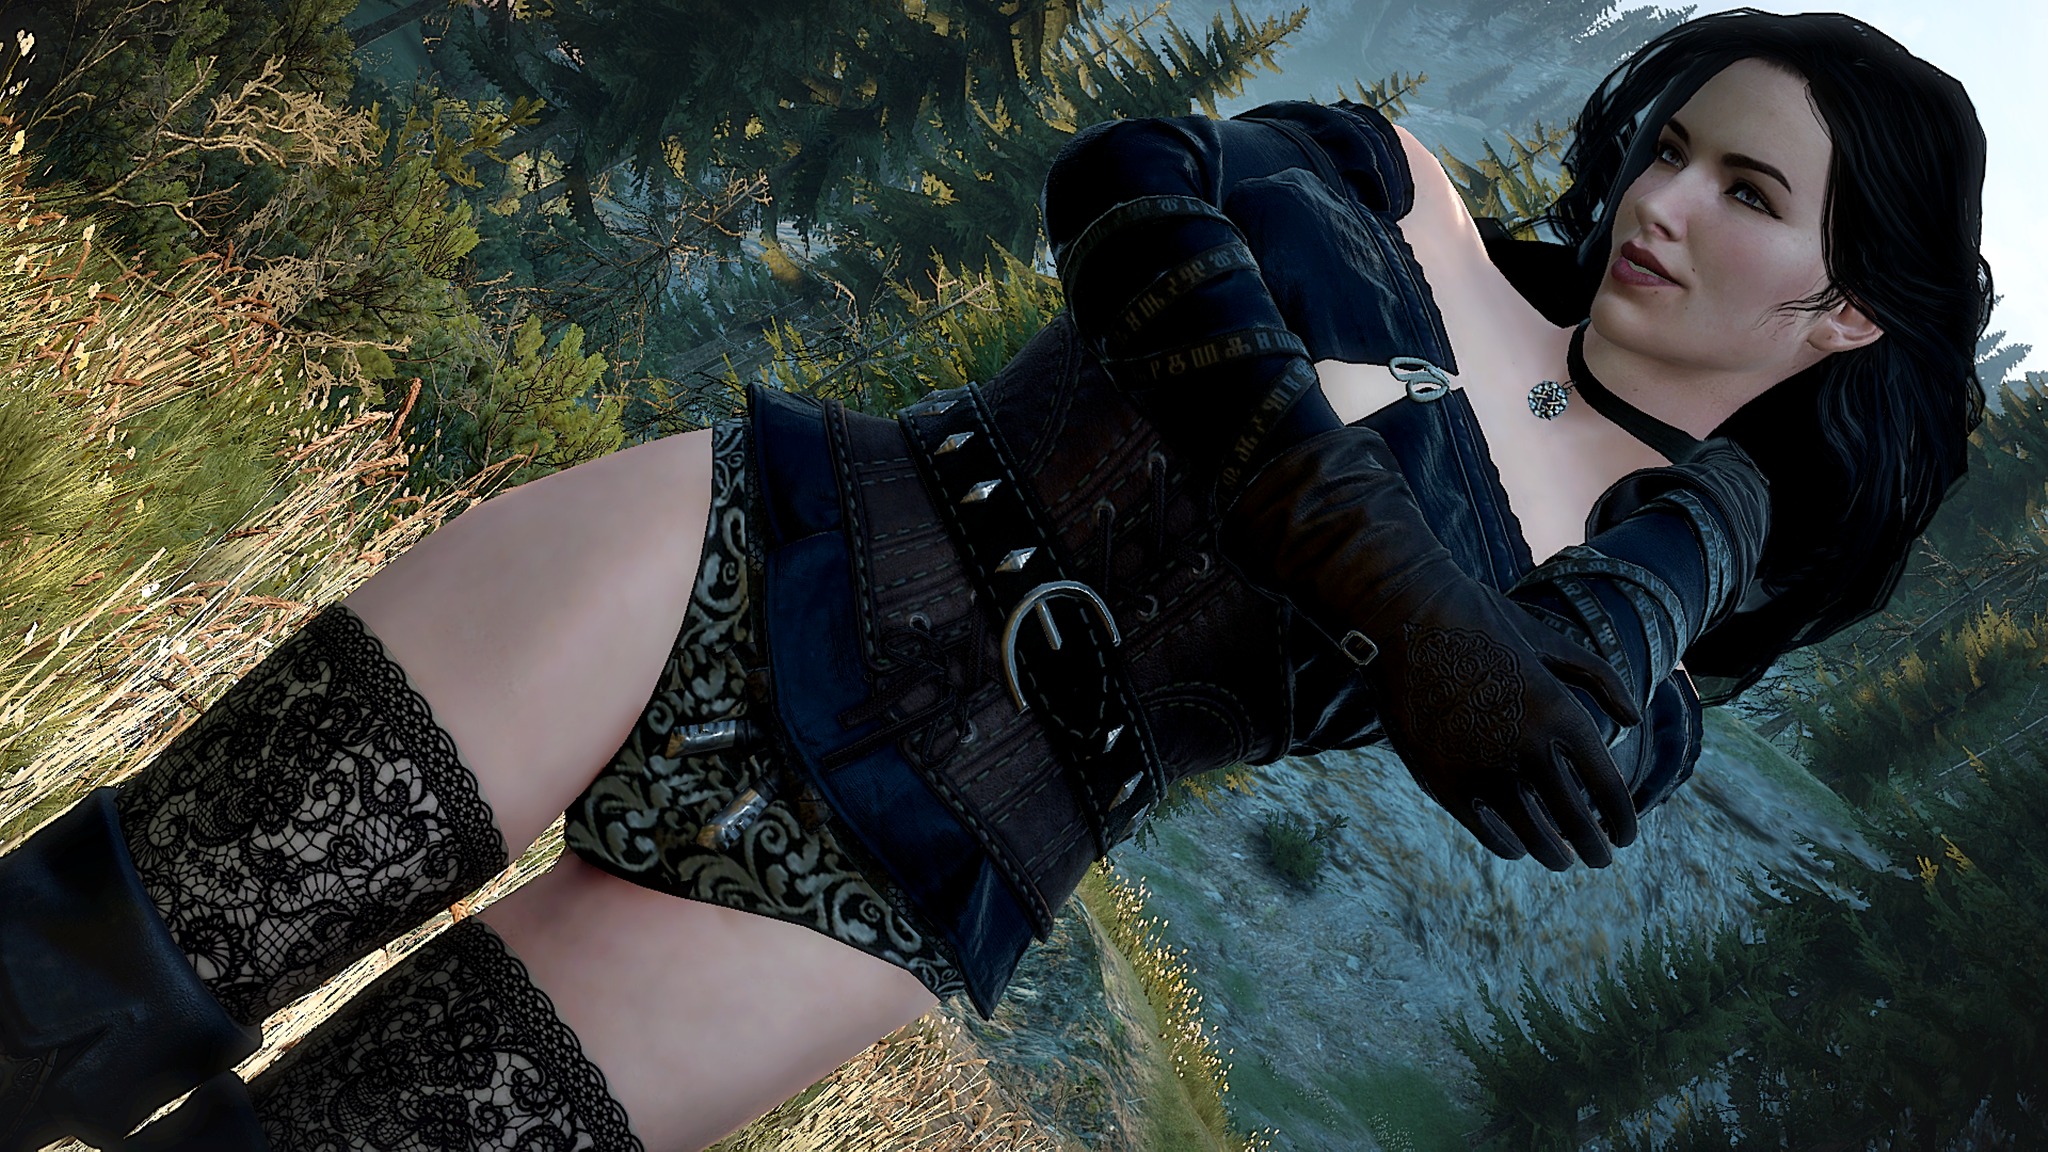 Yennefer of vengerberg the witcher 3 voiced standalone follower se фото 85